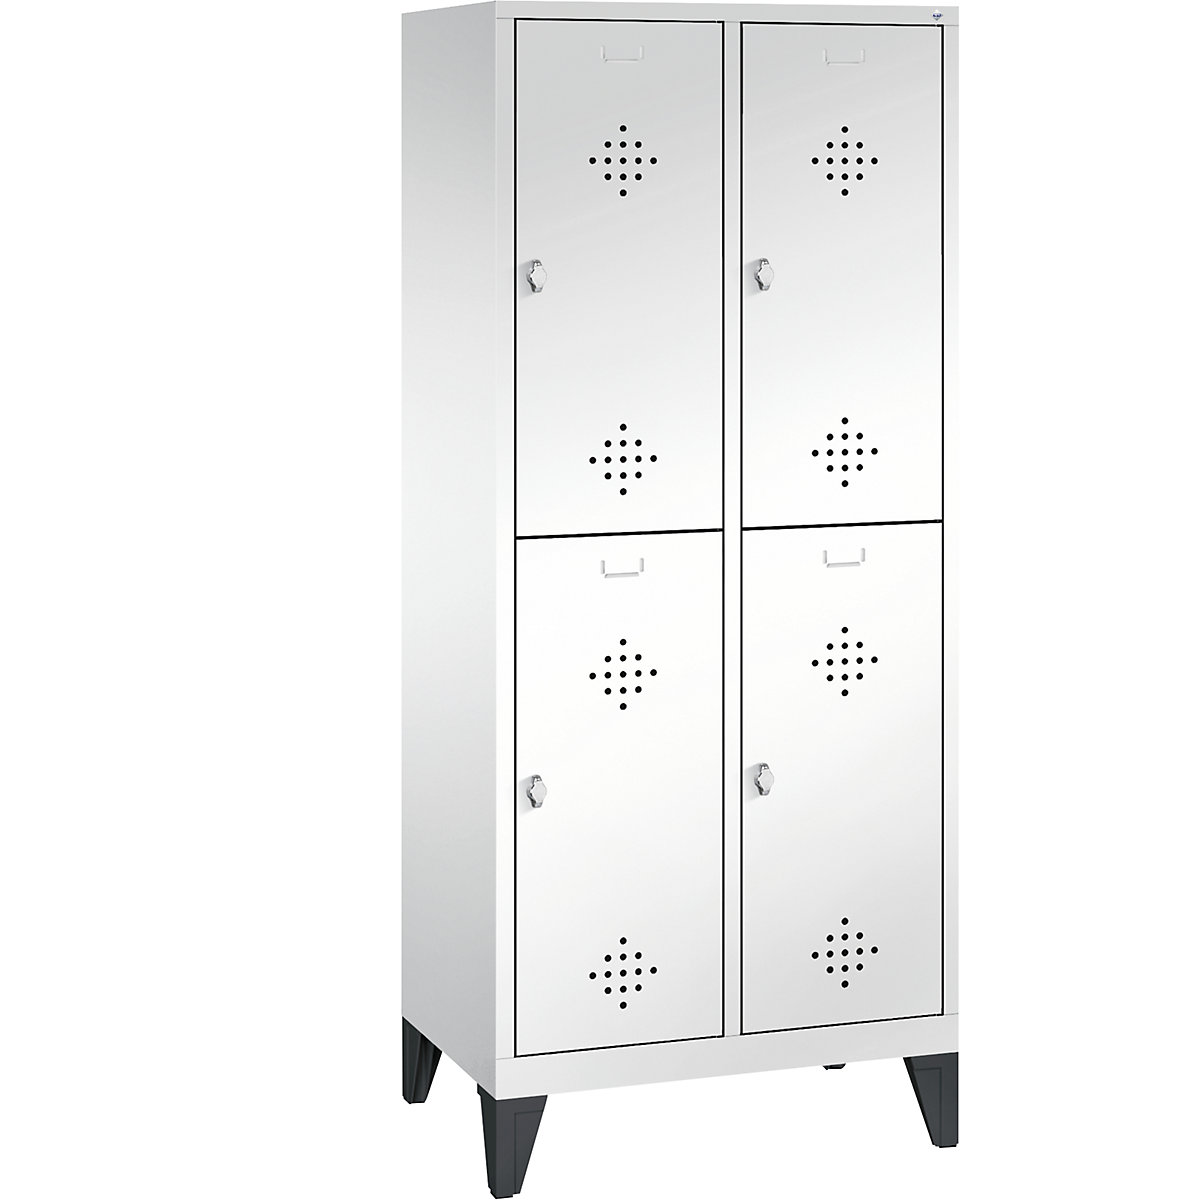 CLASSIC cloakroom locker with feet, double tier – C+P, 2 compartments, 2 shelf compartments each, compartment width 400 mm, traffic white-7